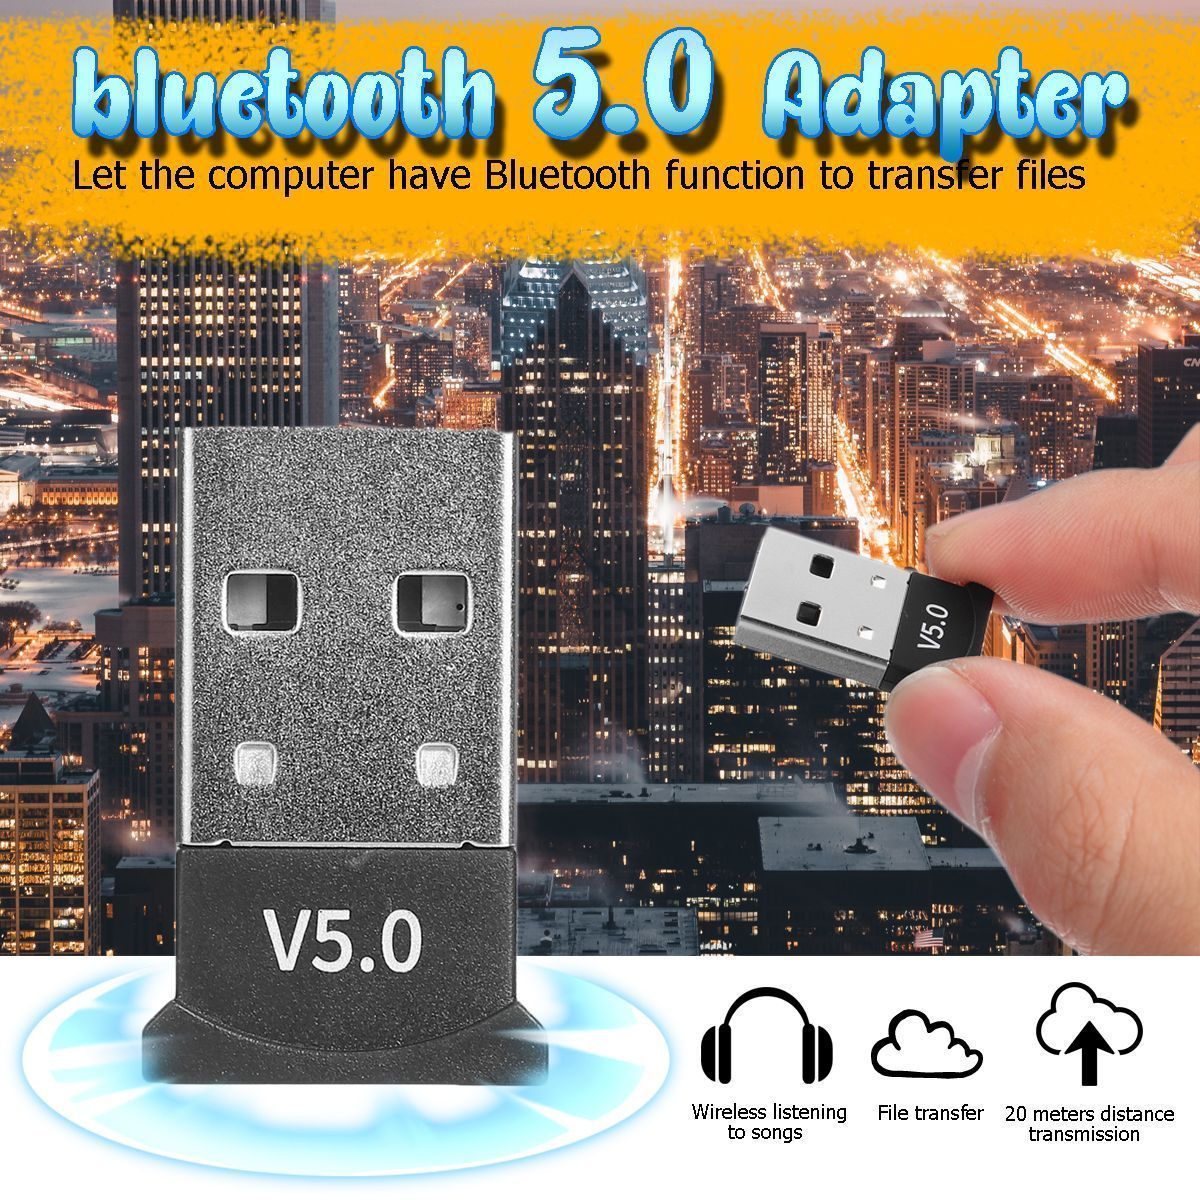 bluetooth-50-USB-Adapter-for-Window-7810-for-Vista-XP-for-Mac-OS-X-PC-Keyboard-Mouse-Gamepads-Speake-1534187